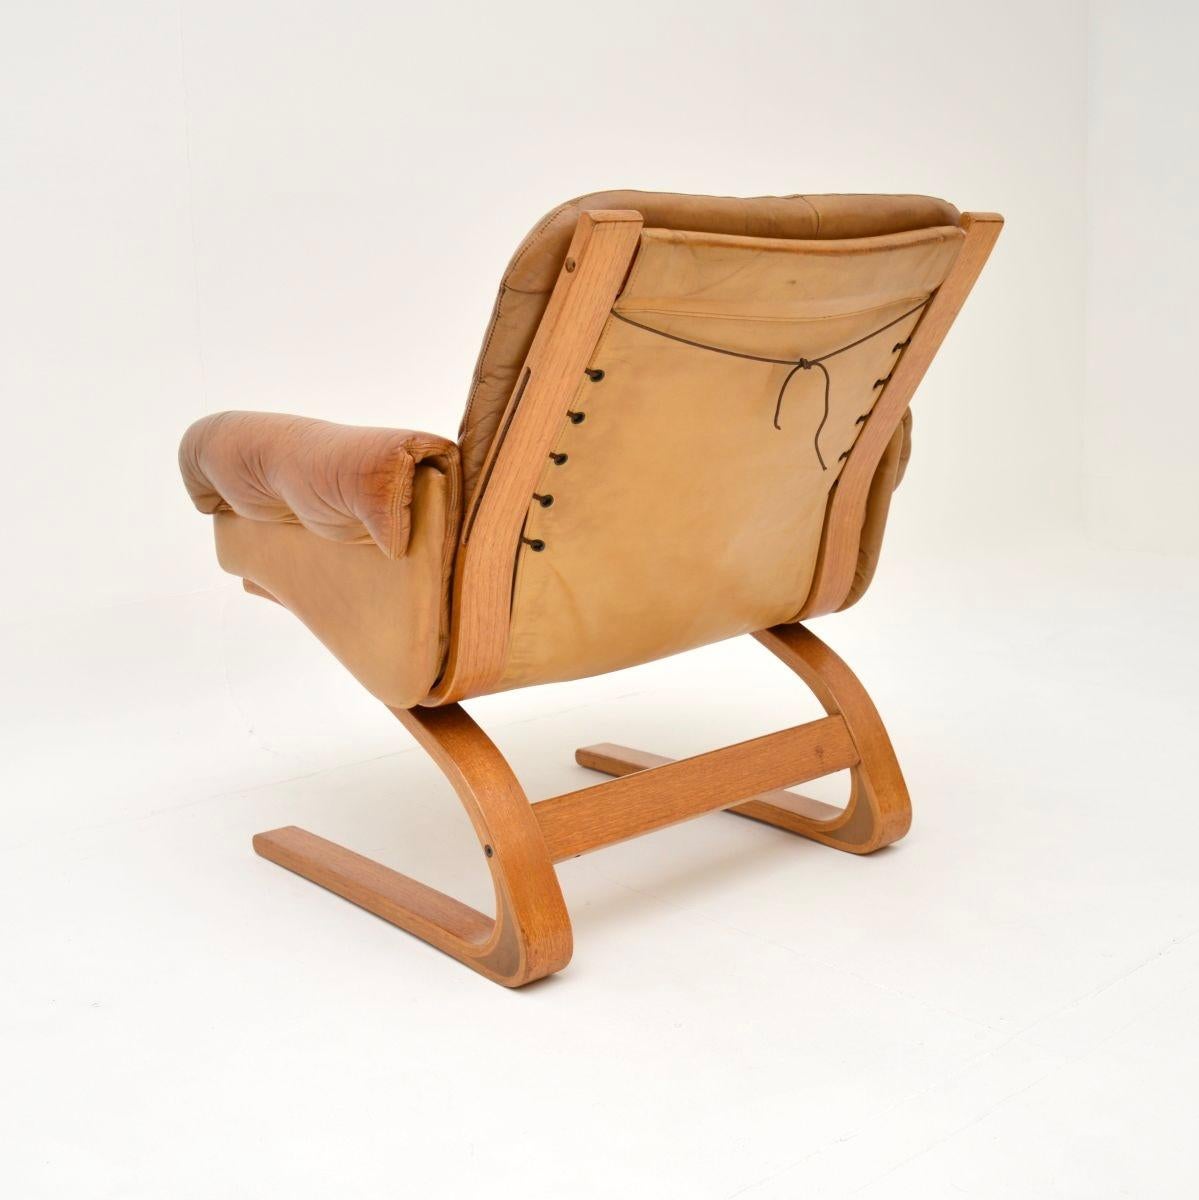 Late 20th Century Vintage Leather Kengu Armchair by Elsa and Nordahl Solheim for Rykken For Sale